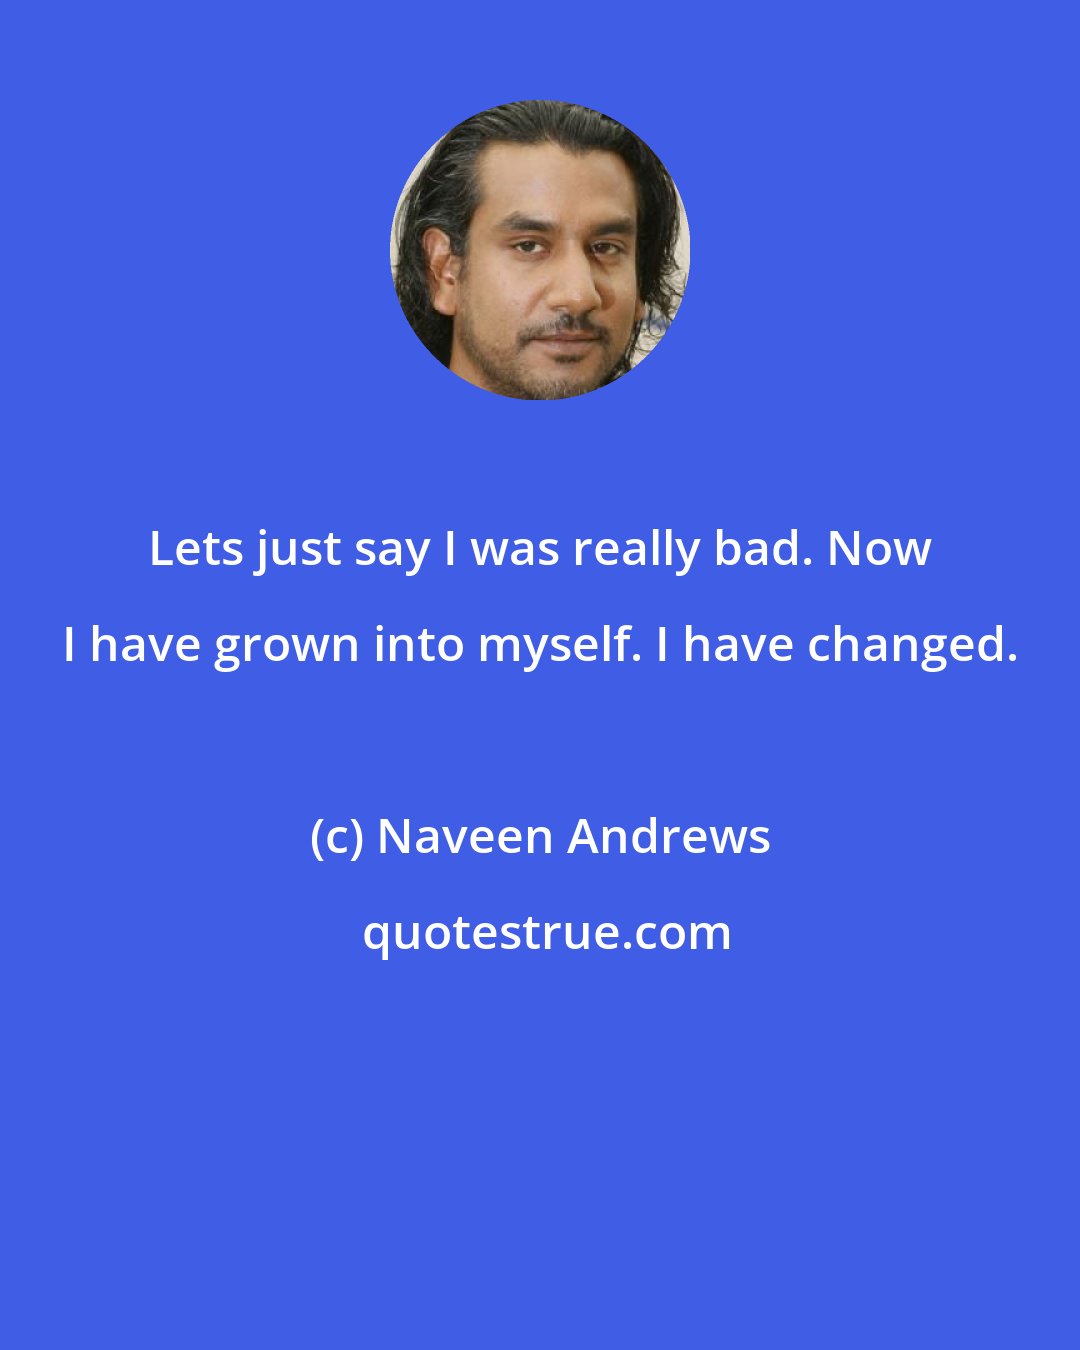 Naveen Andrews: Lets just say I was really bad. Now I have grown into myself. I have changed.